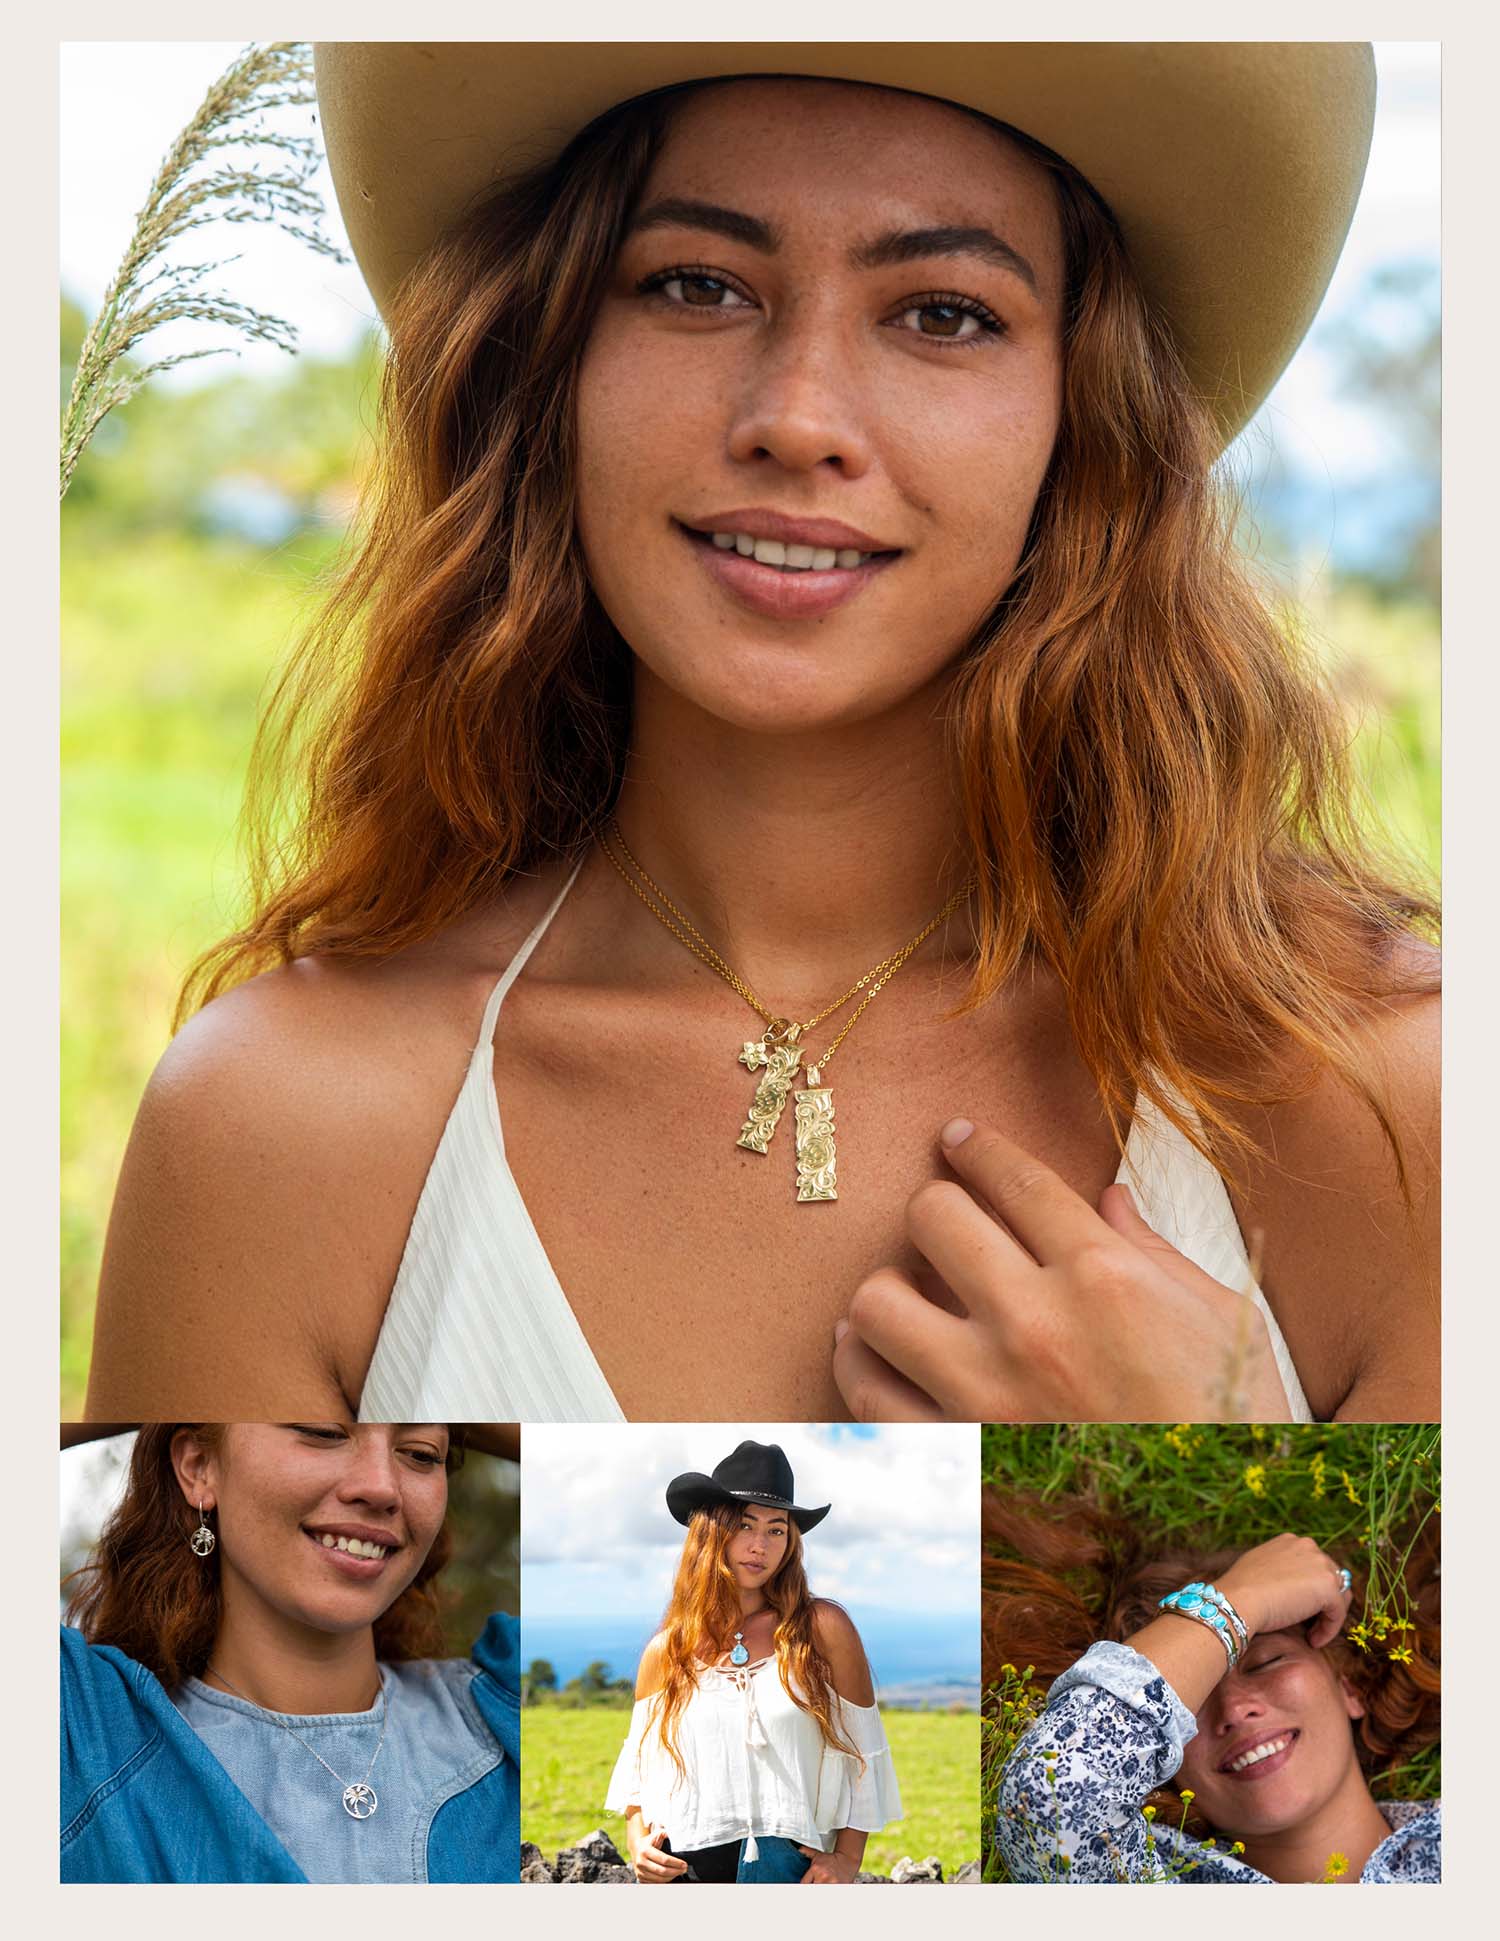 Miss Maui USA - Official Jewelry Sponsor to the Miss Hawaii USA 2024 pageant - featuring our Koa Nani brand with 14K Gold Hawaiian Heirloom jewelry collection